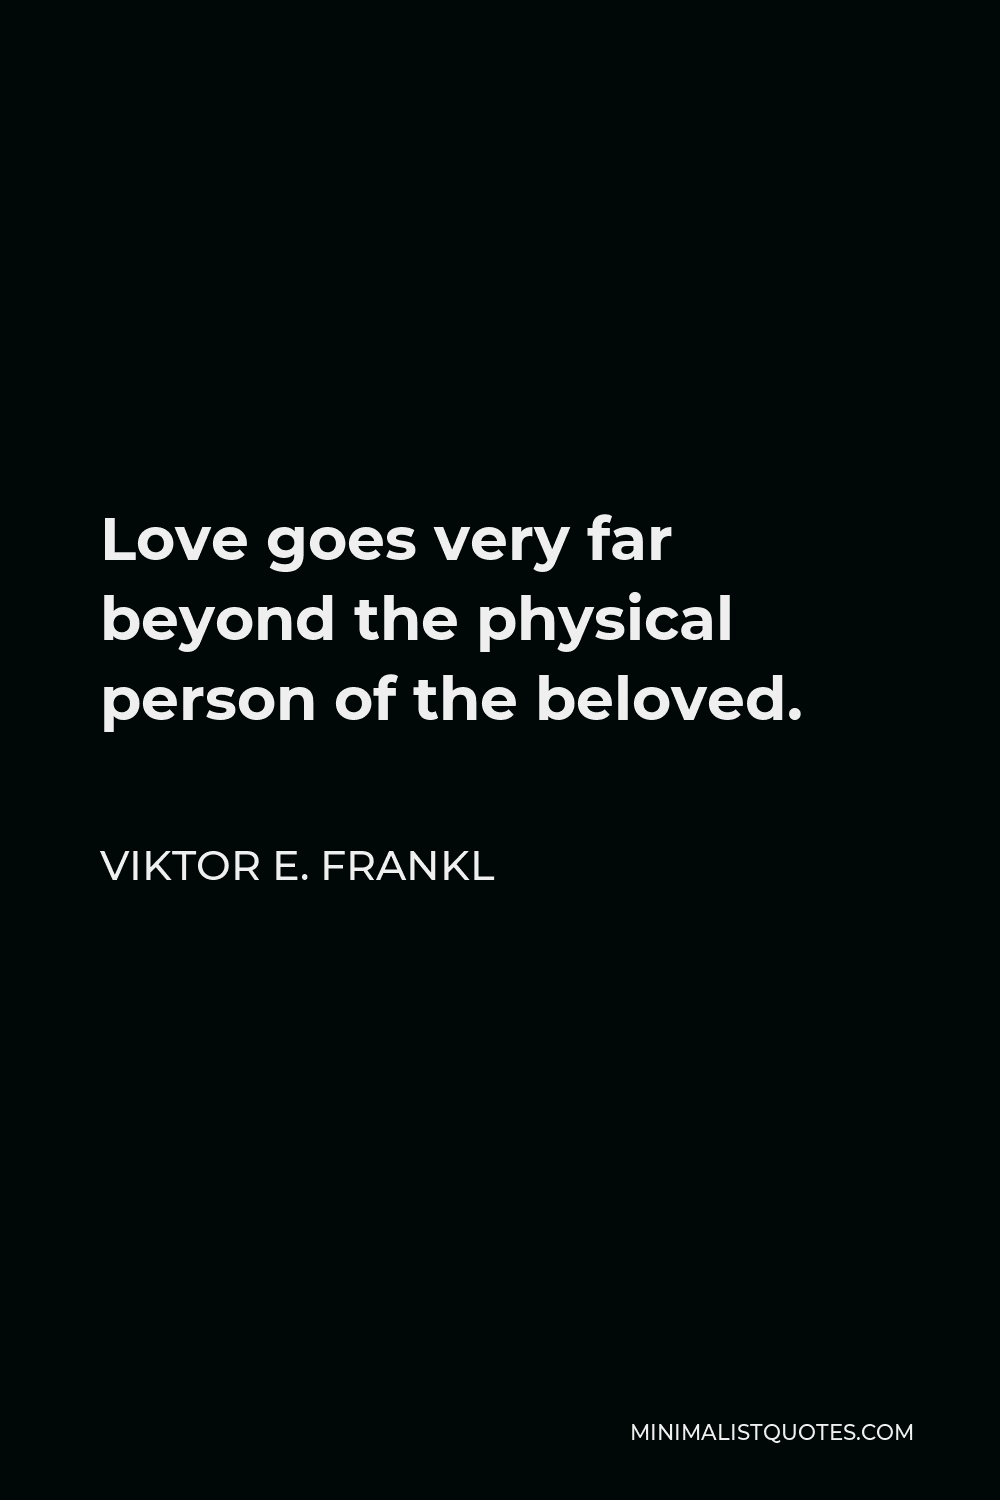 Viktor E. Frankl Quote - Love goes very far beyond the physical person of the beloved.